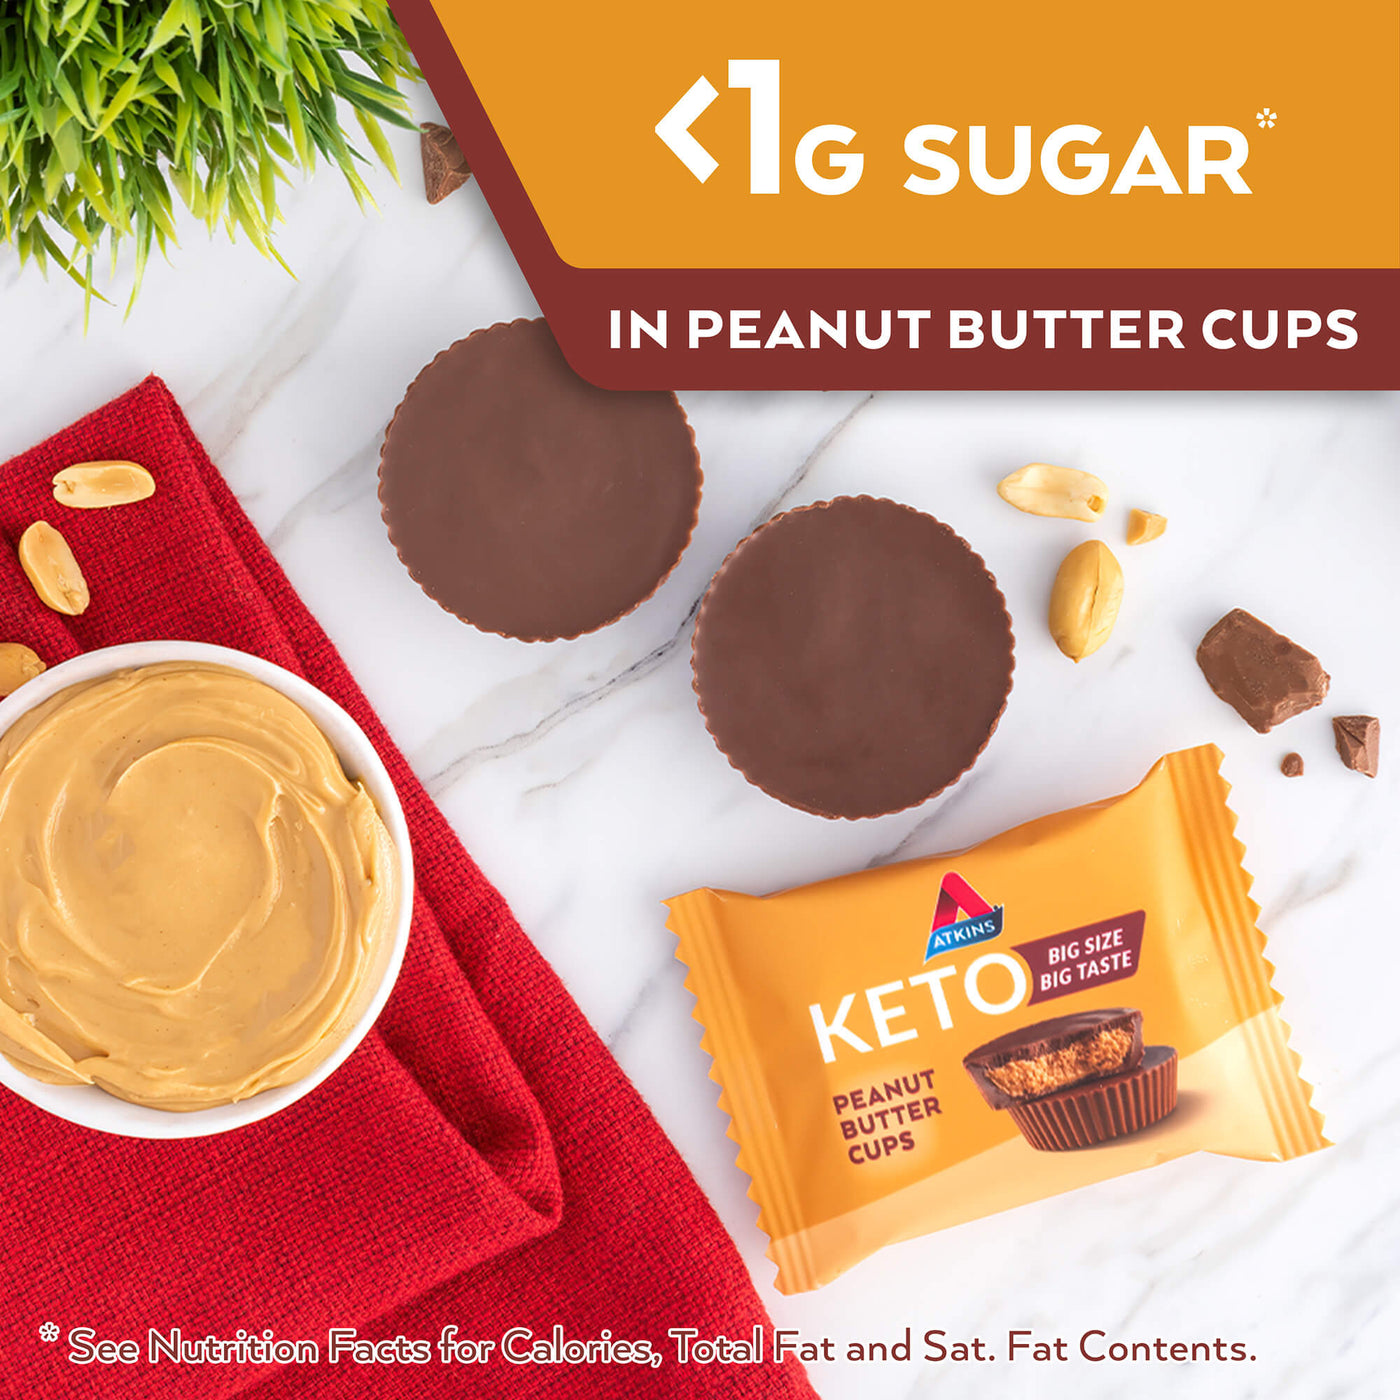 <1g sugar* in Peanut Butter Cups. *see Nutrition Facts for calories, Total fat and Sat. Fat contents.